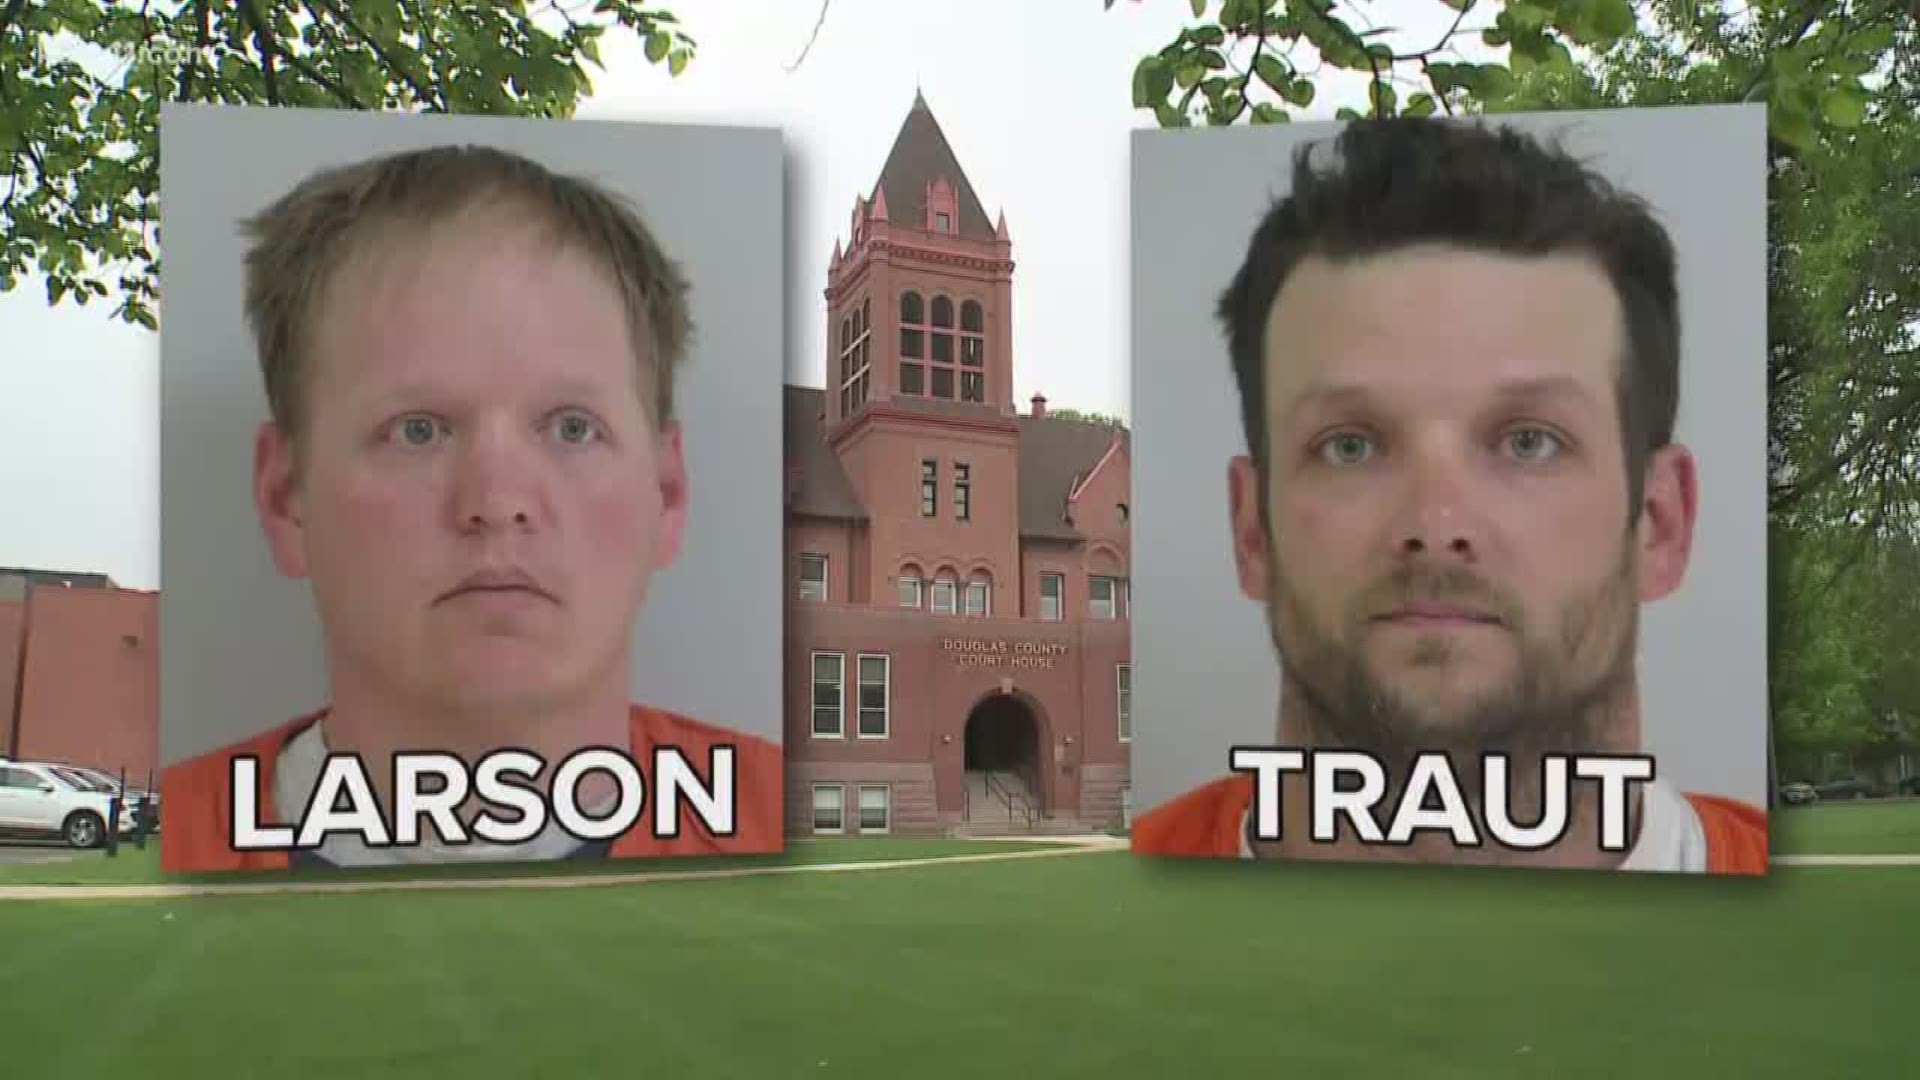 Troy Traut and Jacob Larson are each with first-degree manslaughter and fifth-degree assault. https://kare11.tv/2rXjsCb